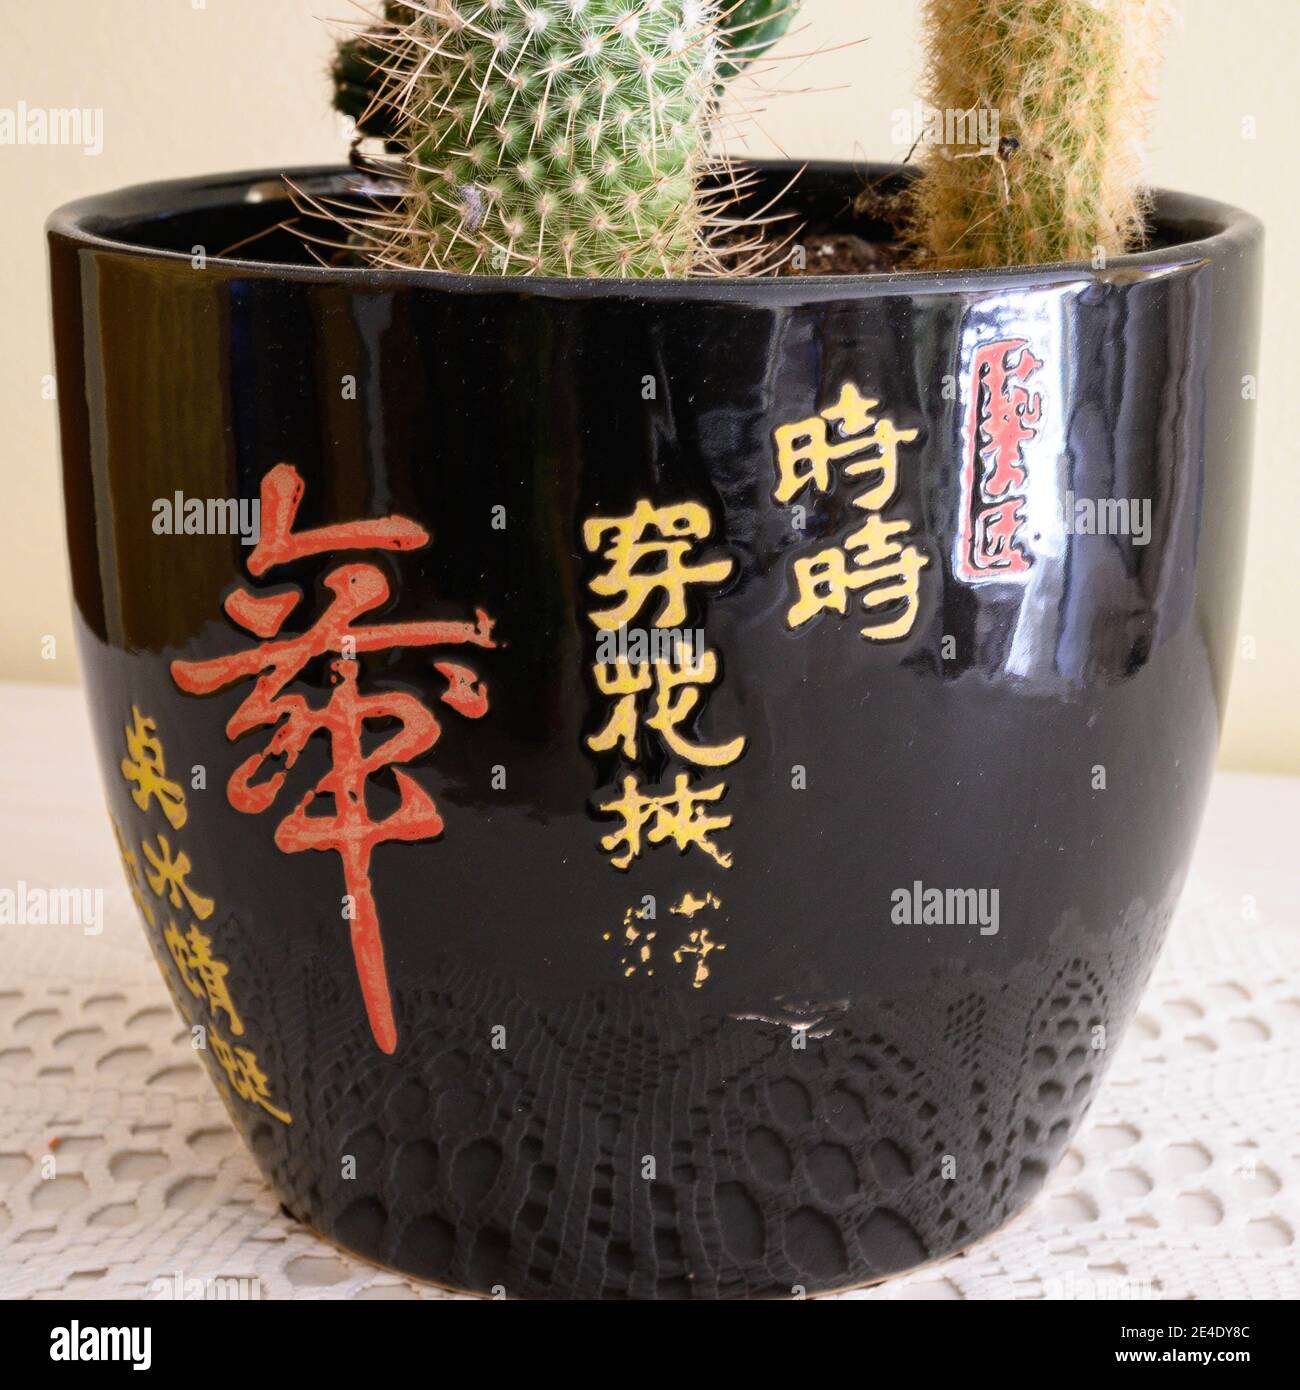 Ceramic vase with Chinese ideograms used for the cultivation of succulents. Stock Photo